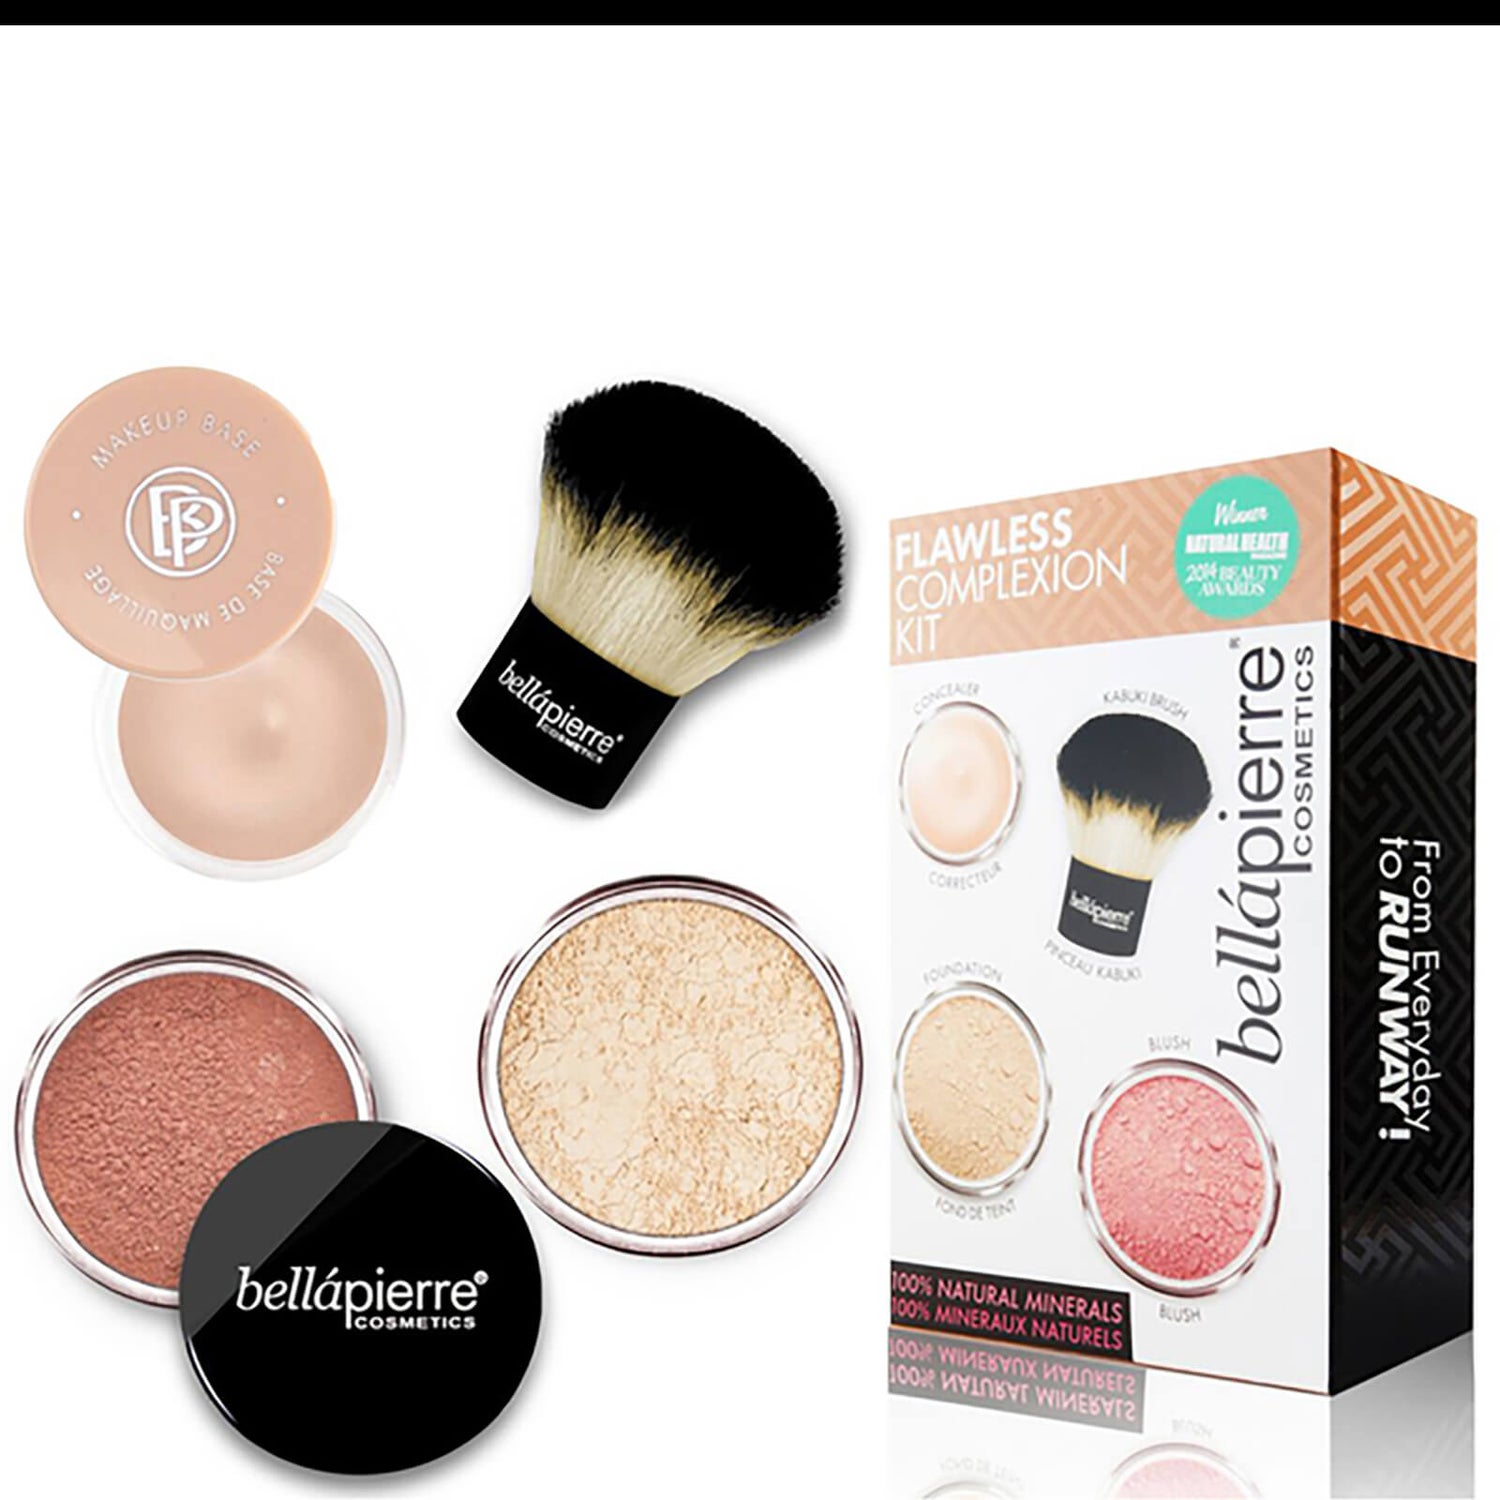 Bellapierre Cosmetics Flawless Complexion Kit - Clair